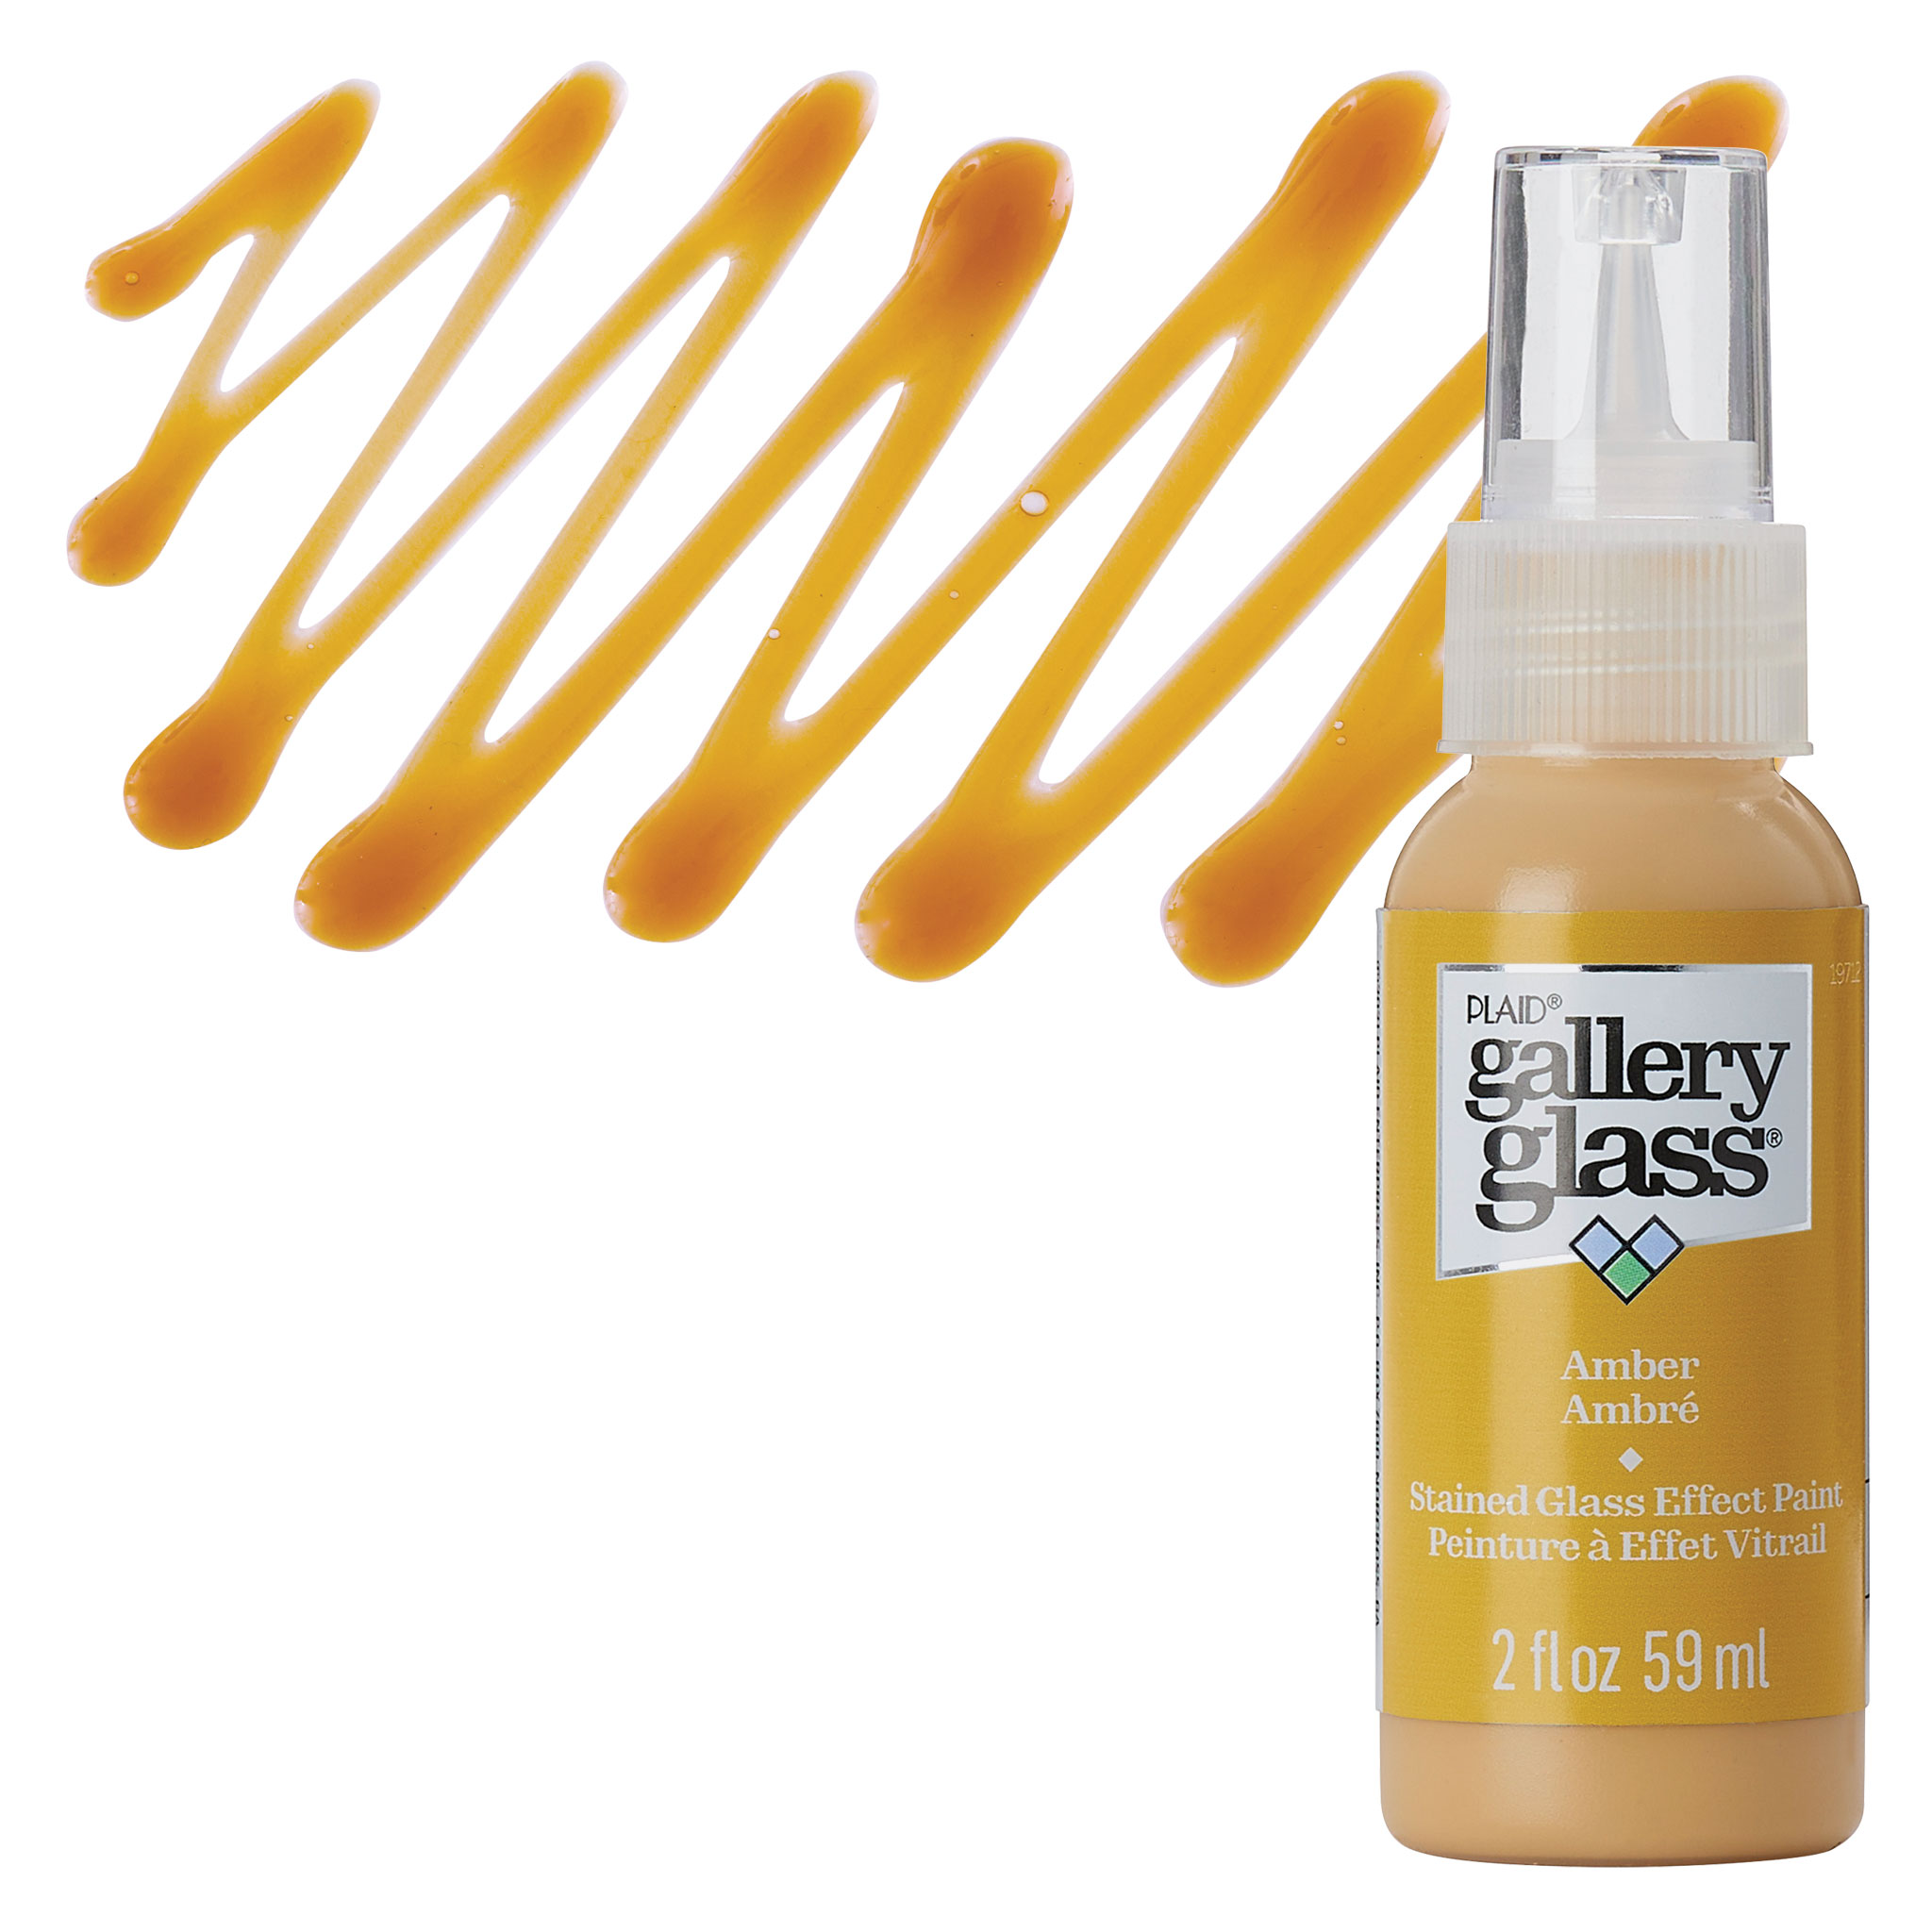  Gallery Glass: Gallery Glass Paints